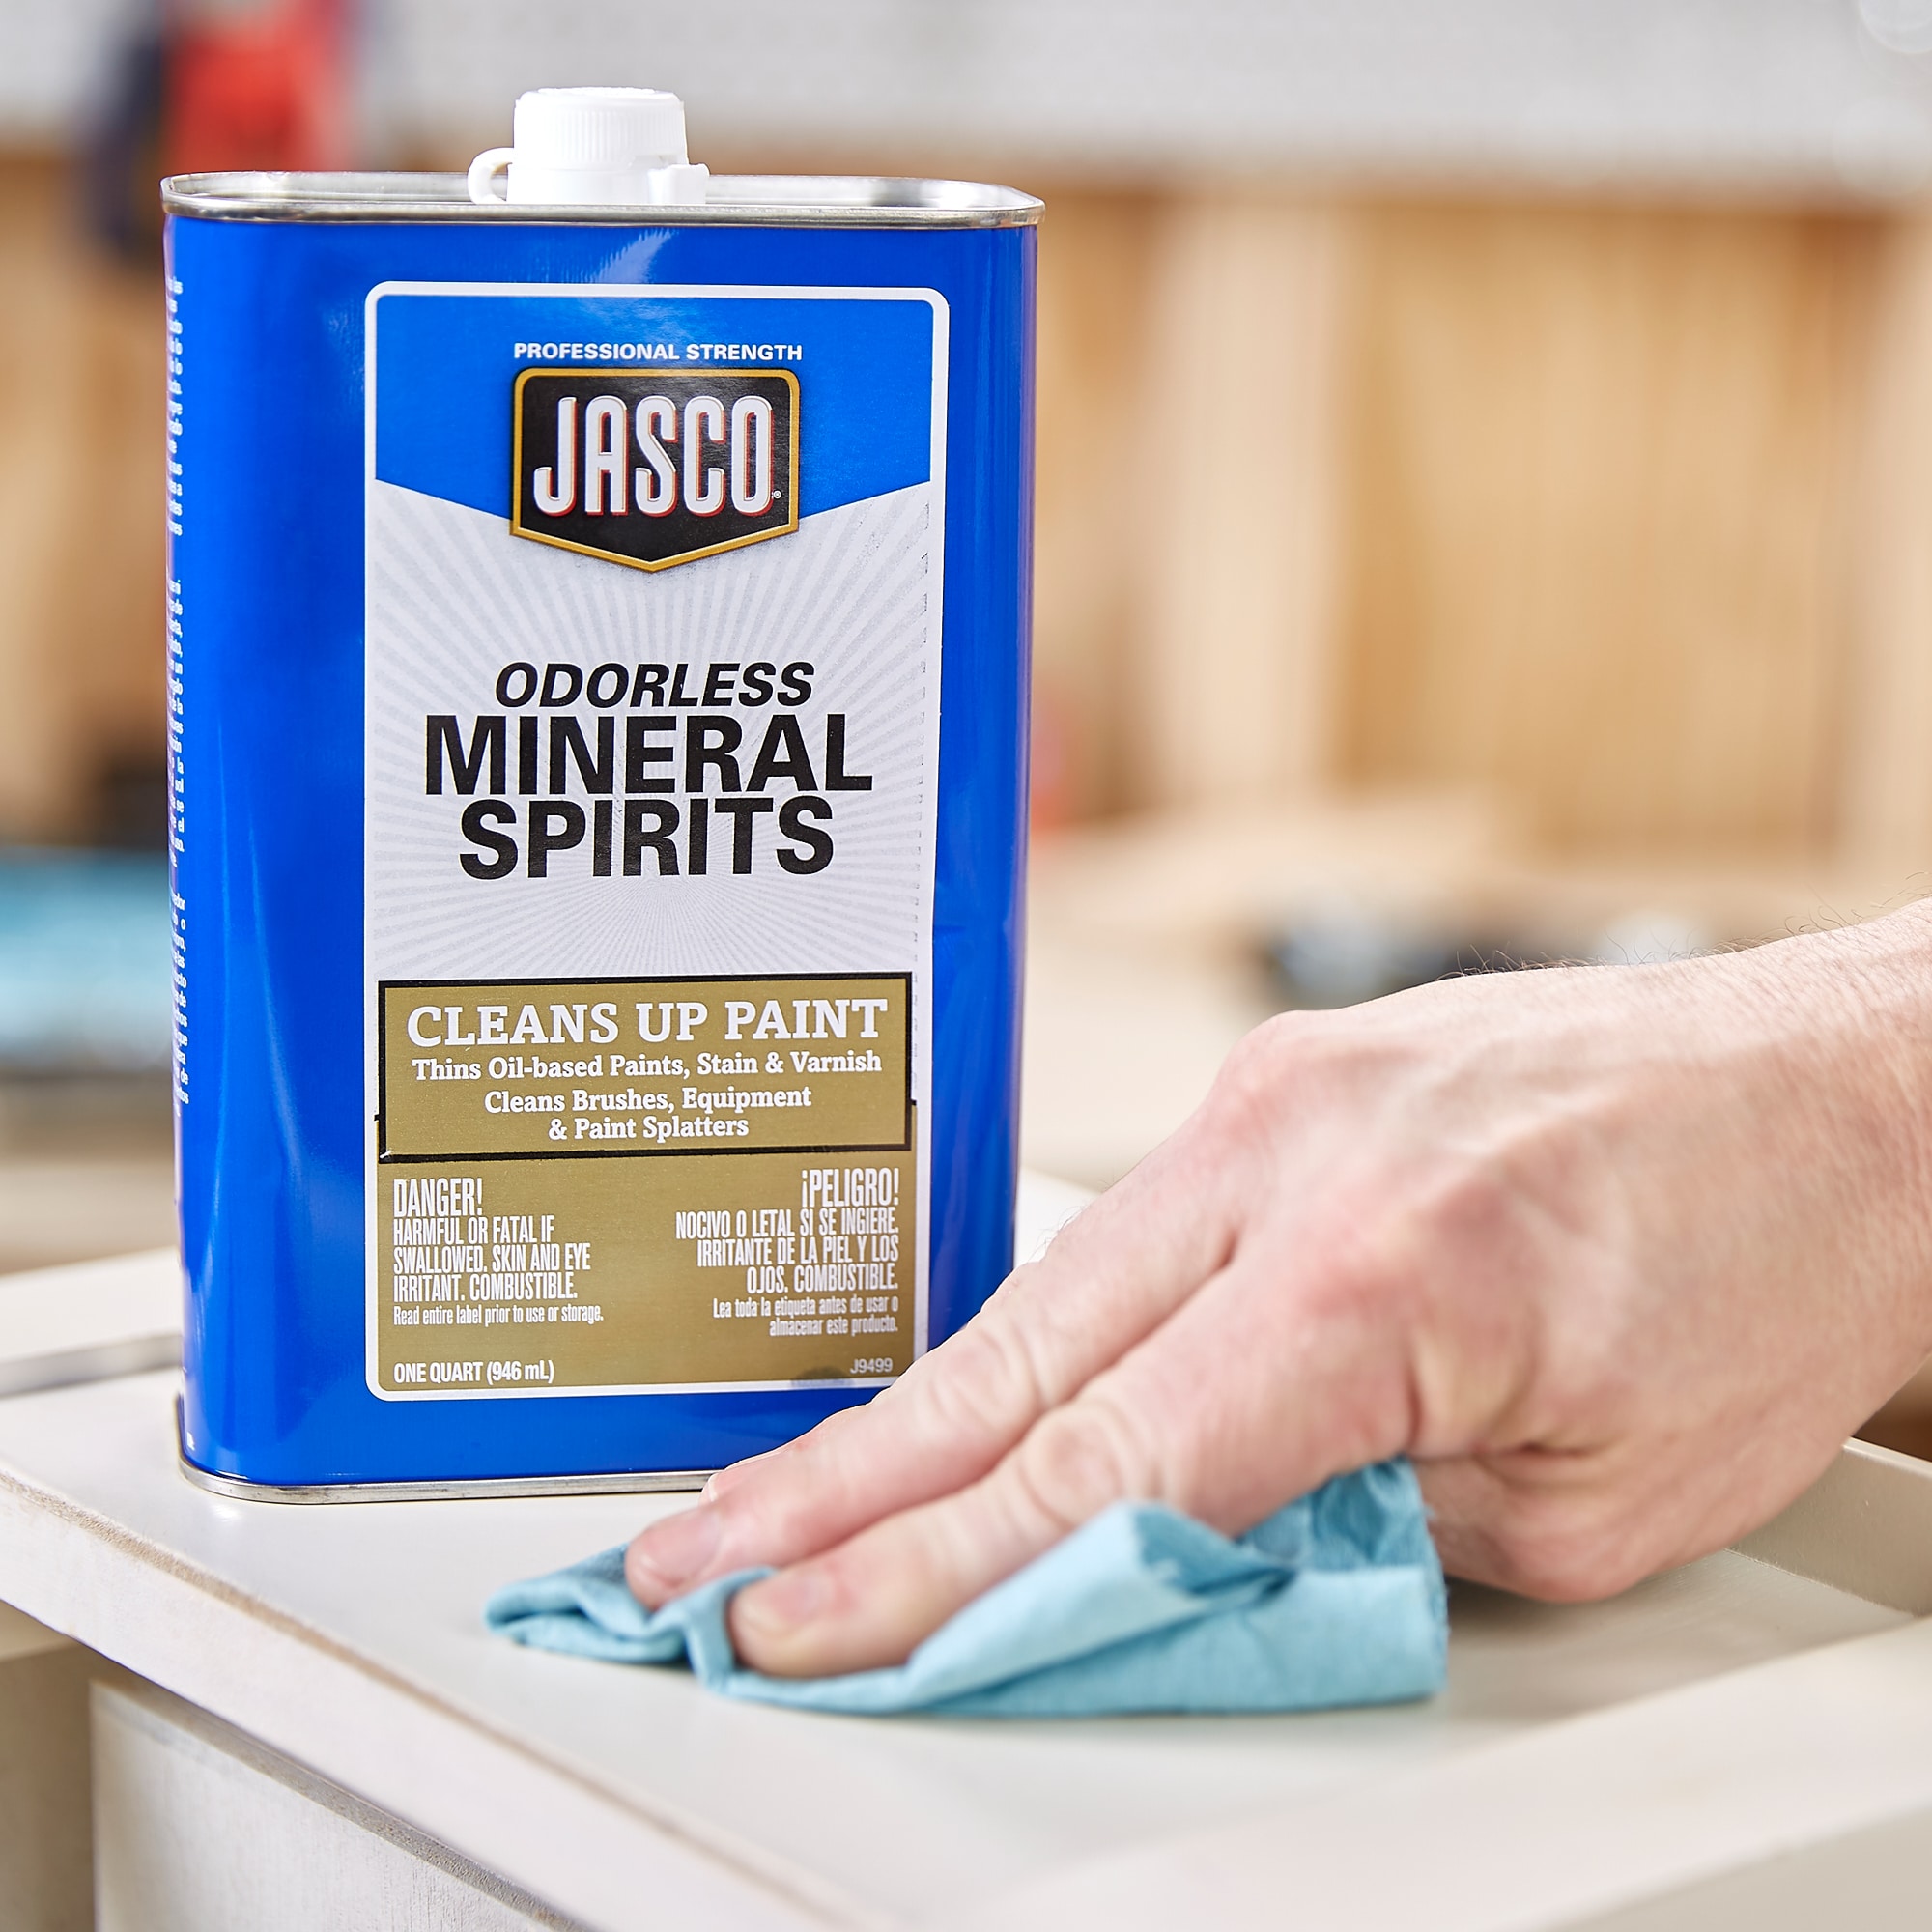 Mineral spirits 75ml - Purchase online from our Internet store